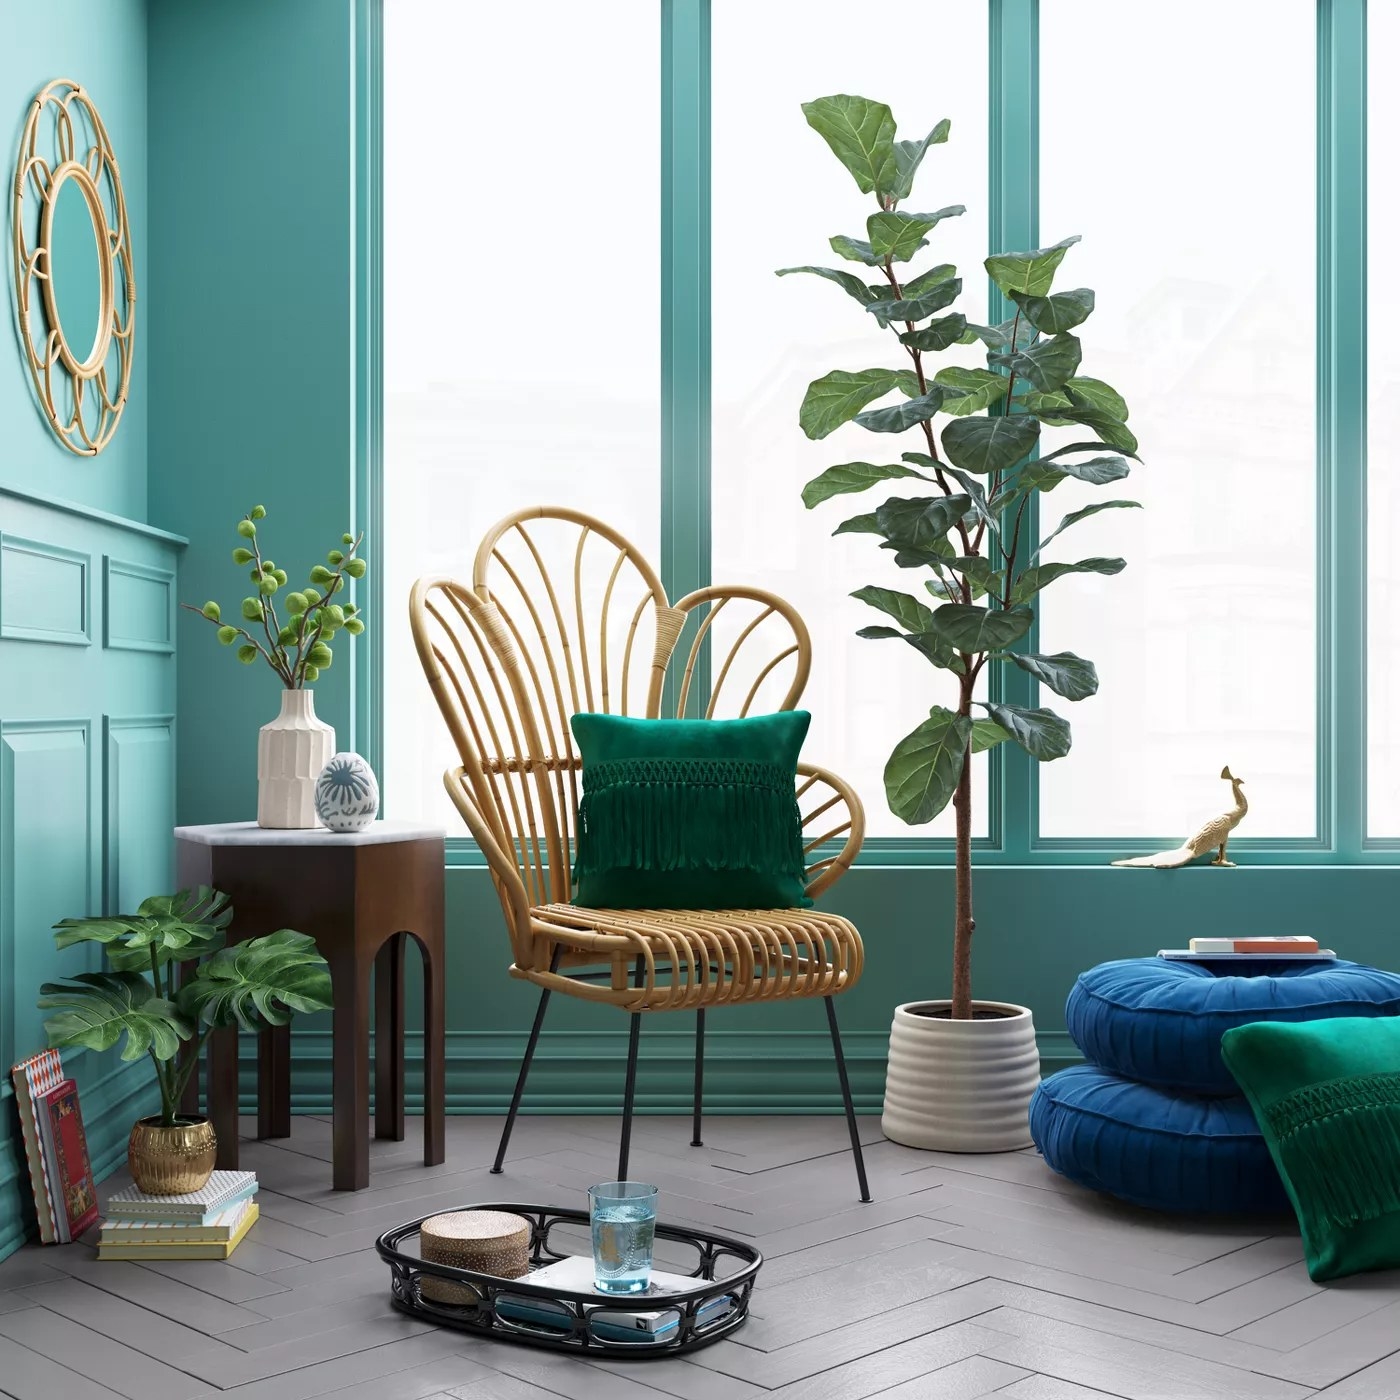 The chair in a living room decorated with a green pillow